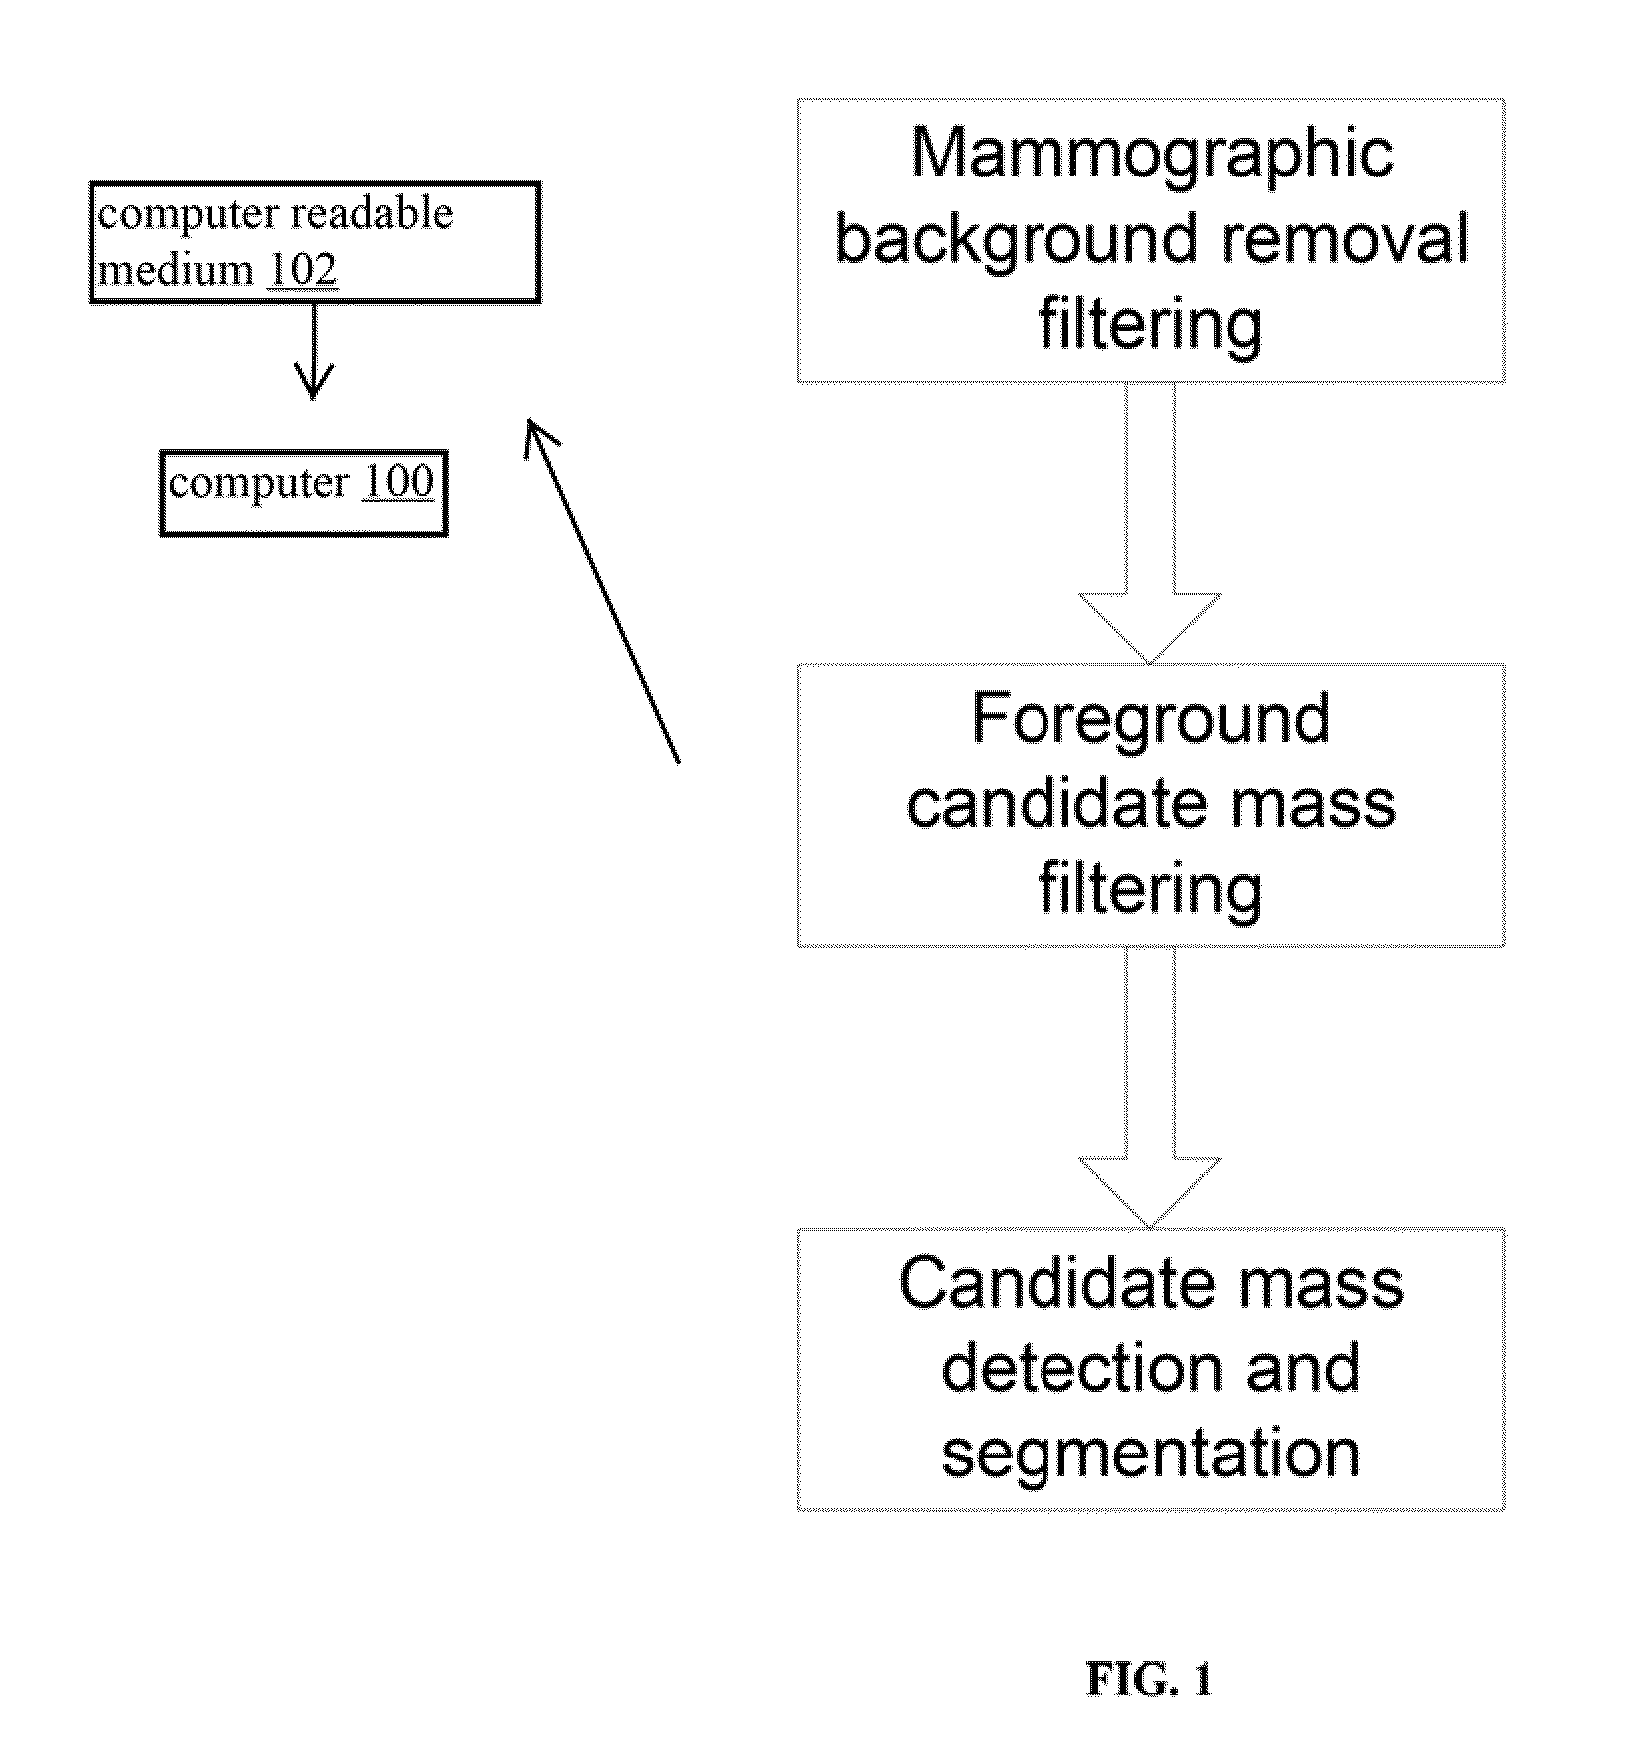 Method for Mass Candidate Detection and Segmentation in Digital Mammograms